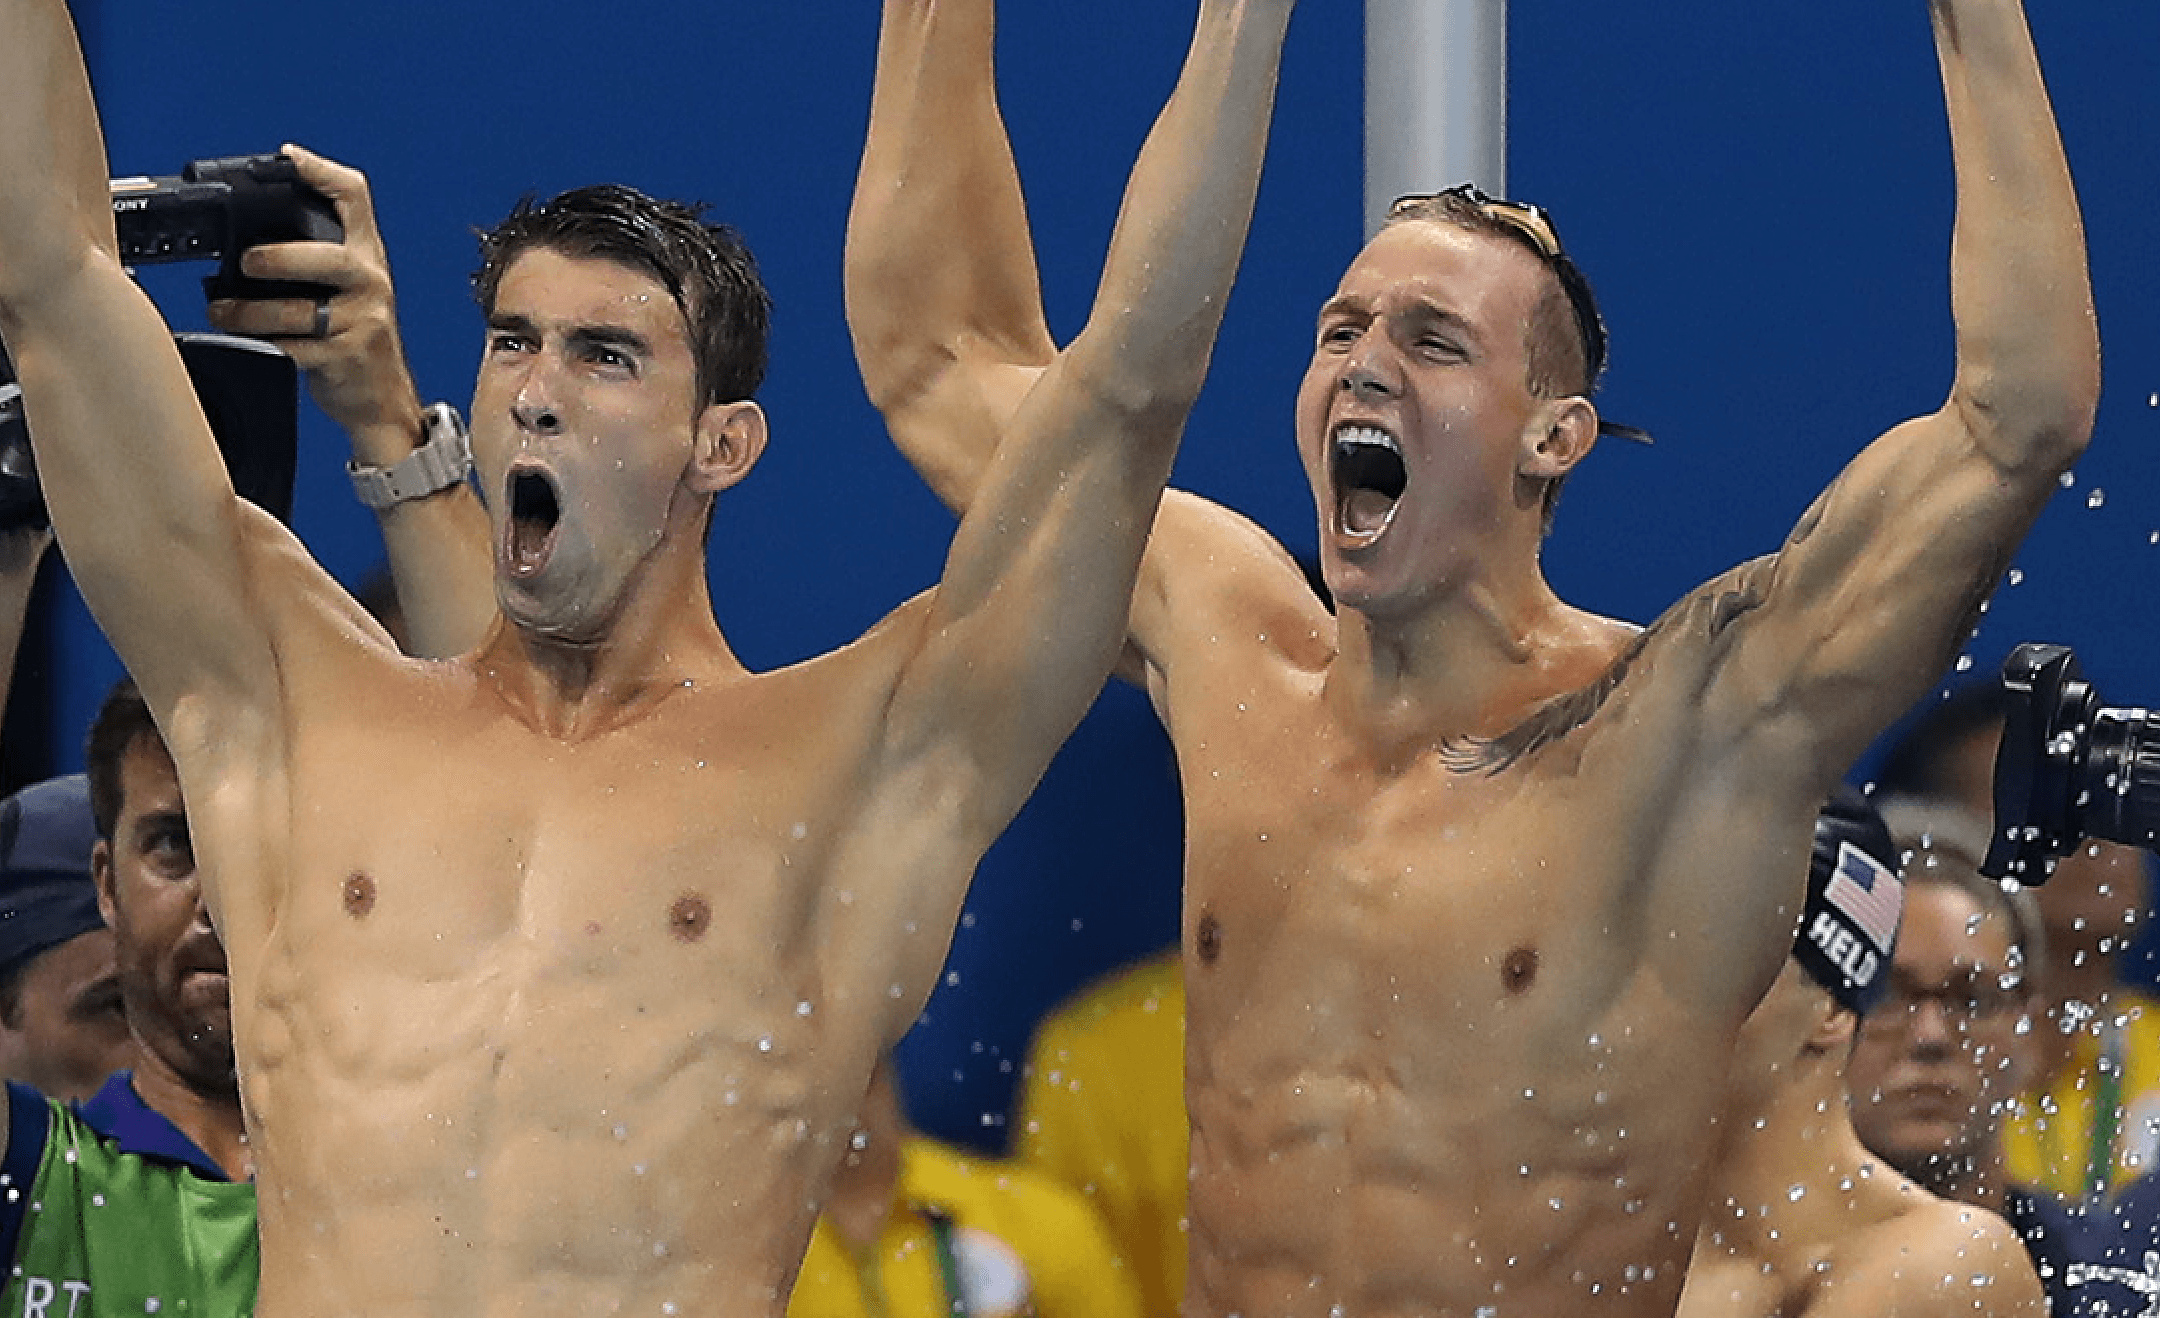 21 Learn from the Best Swimmers on the Planet